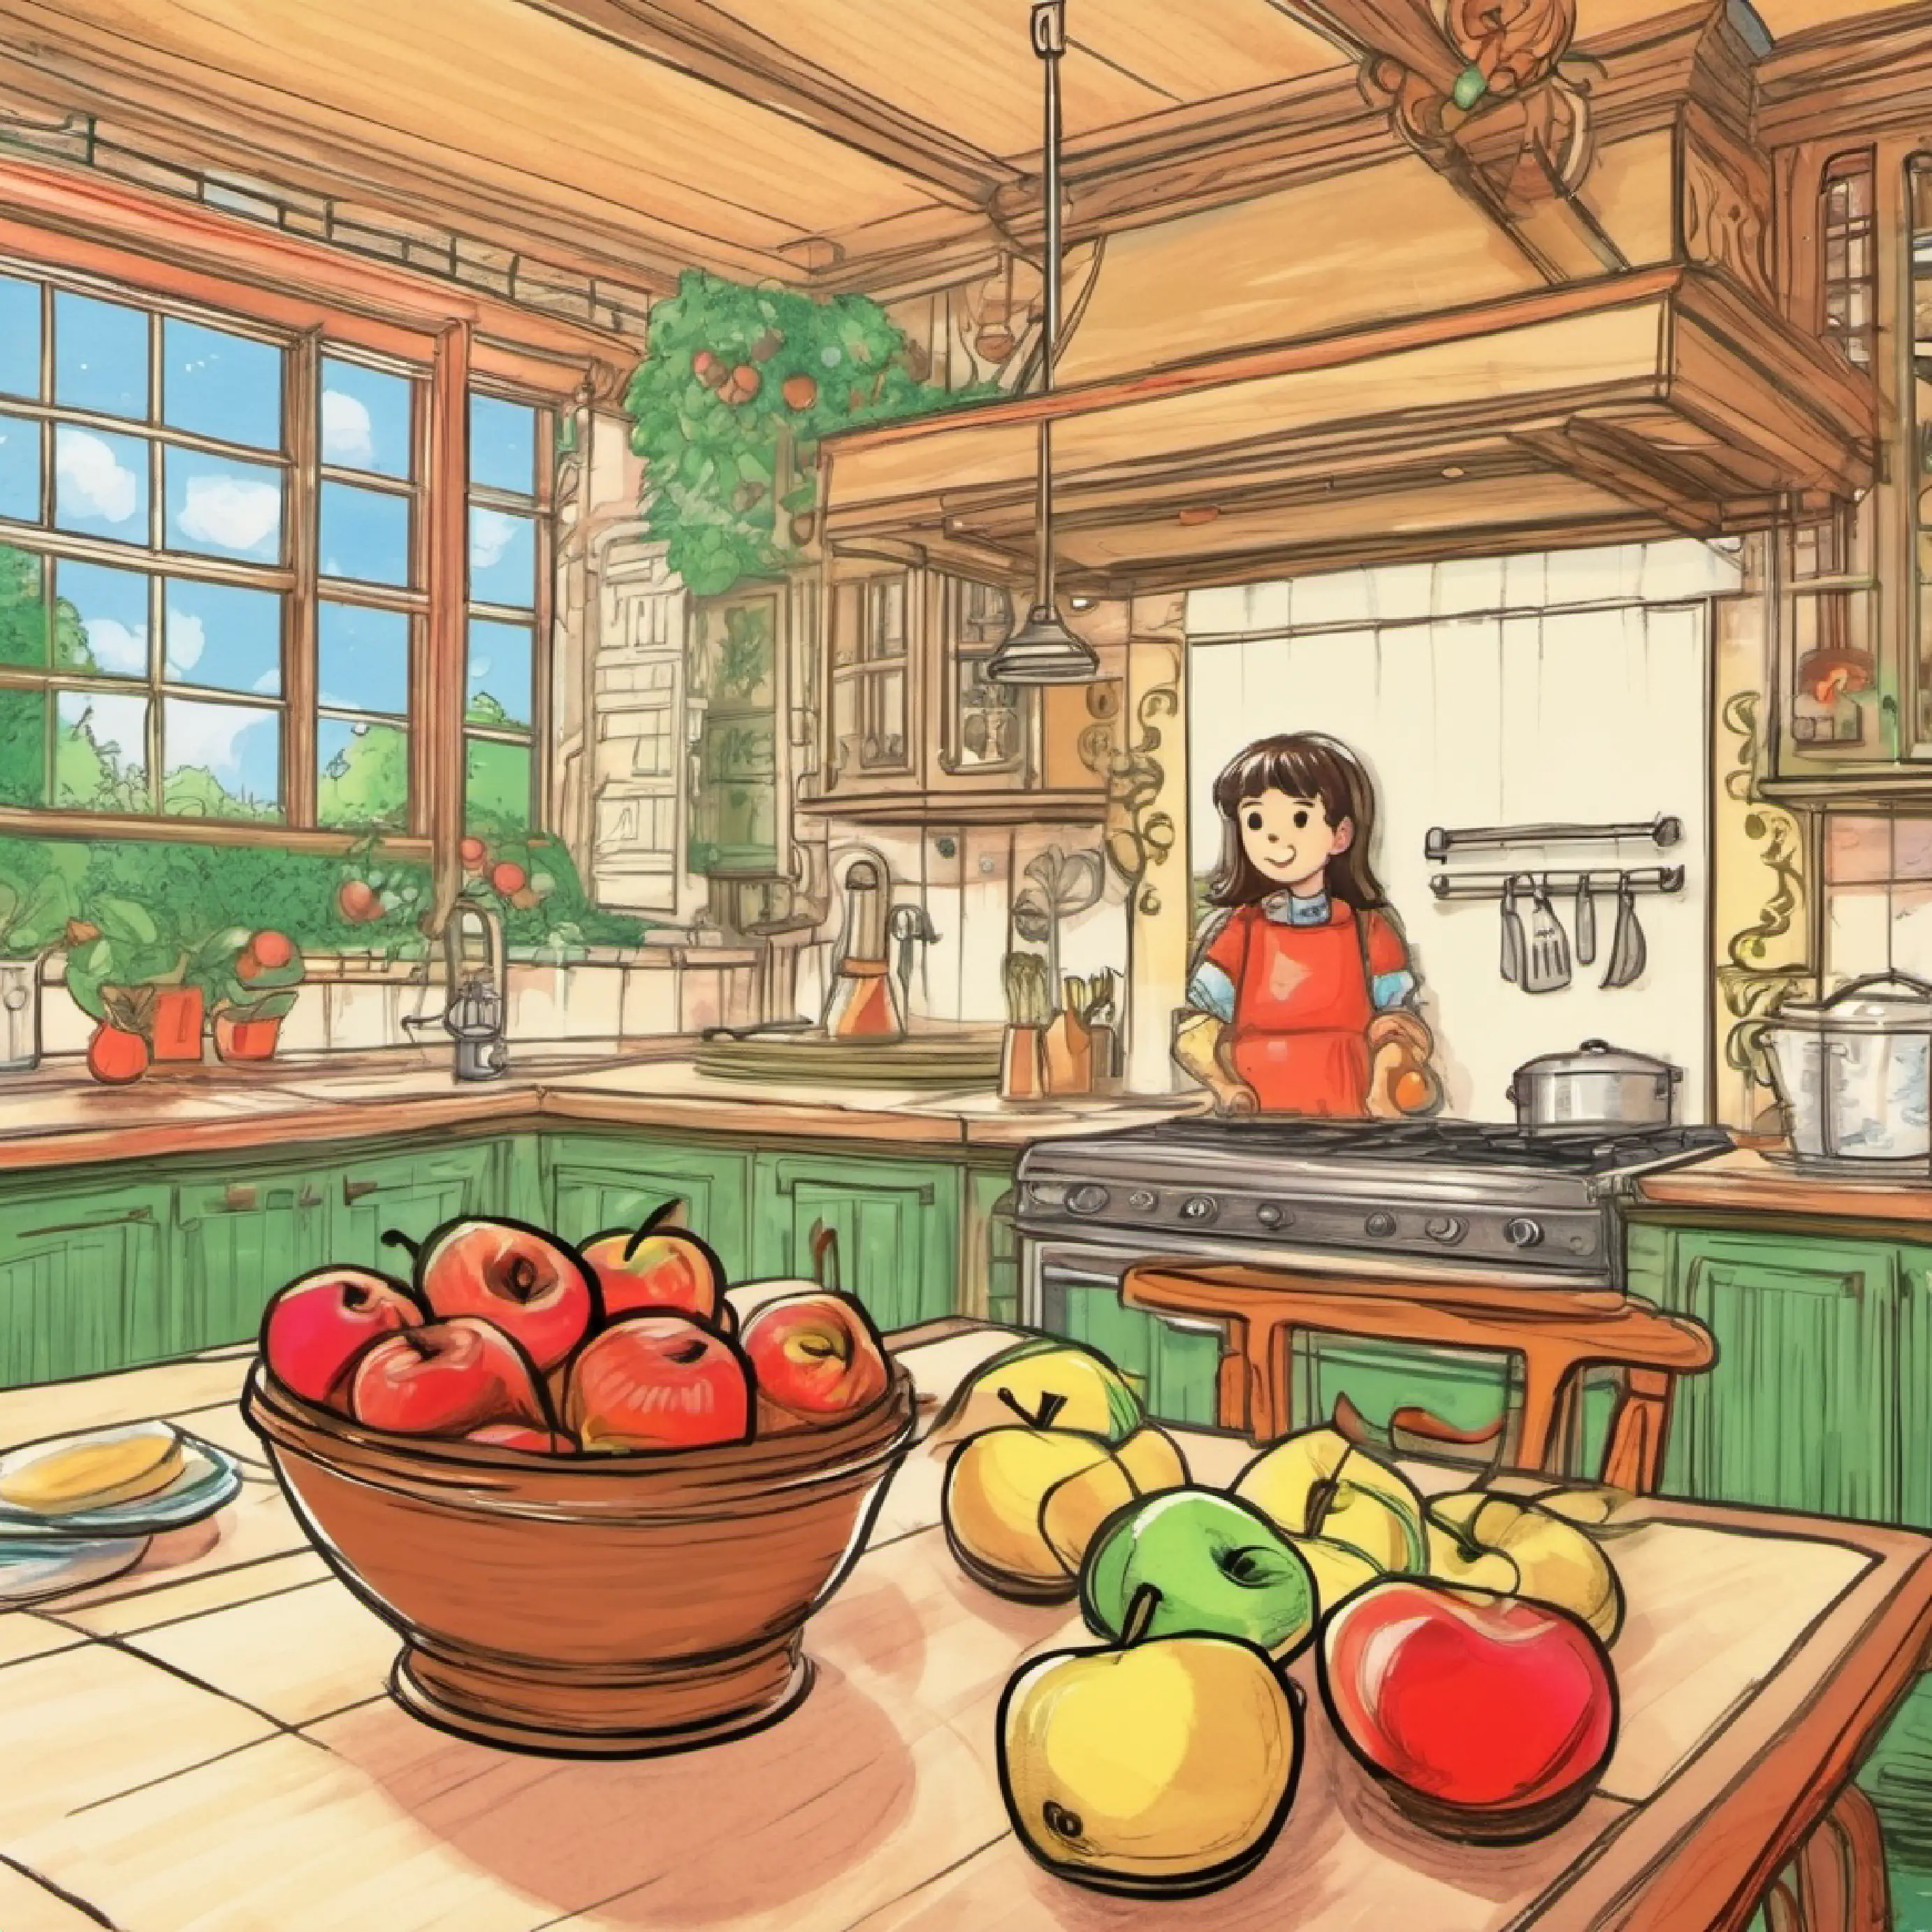 Starting quest in the kitchen with apples